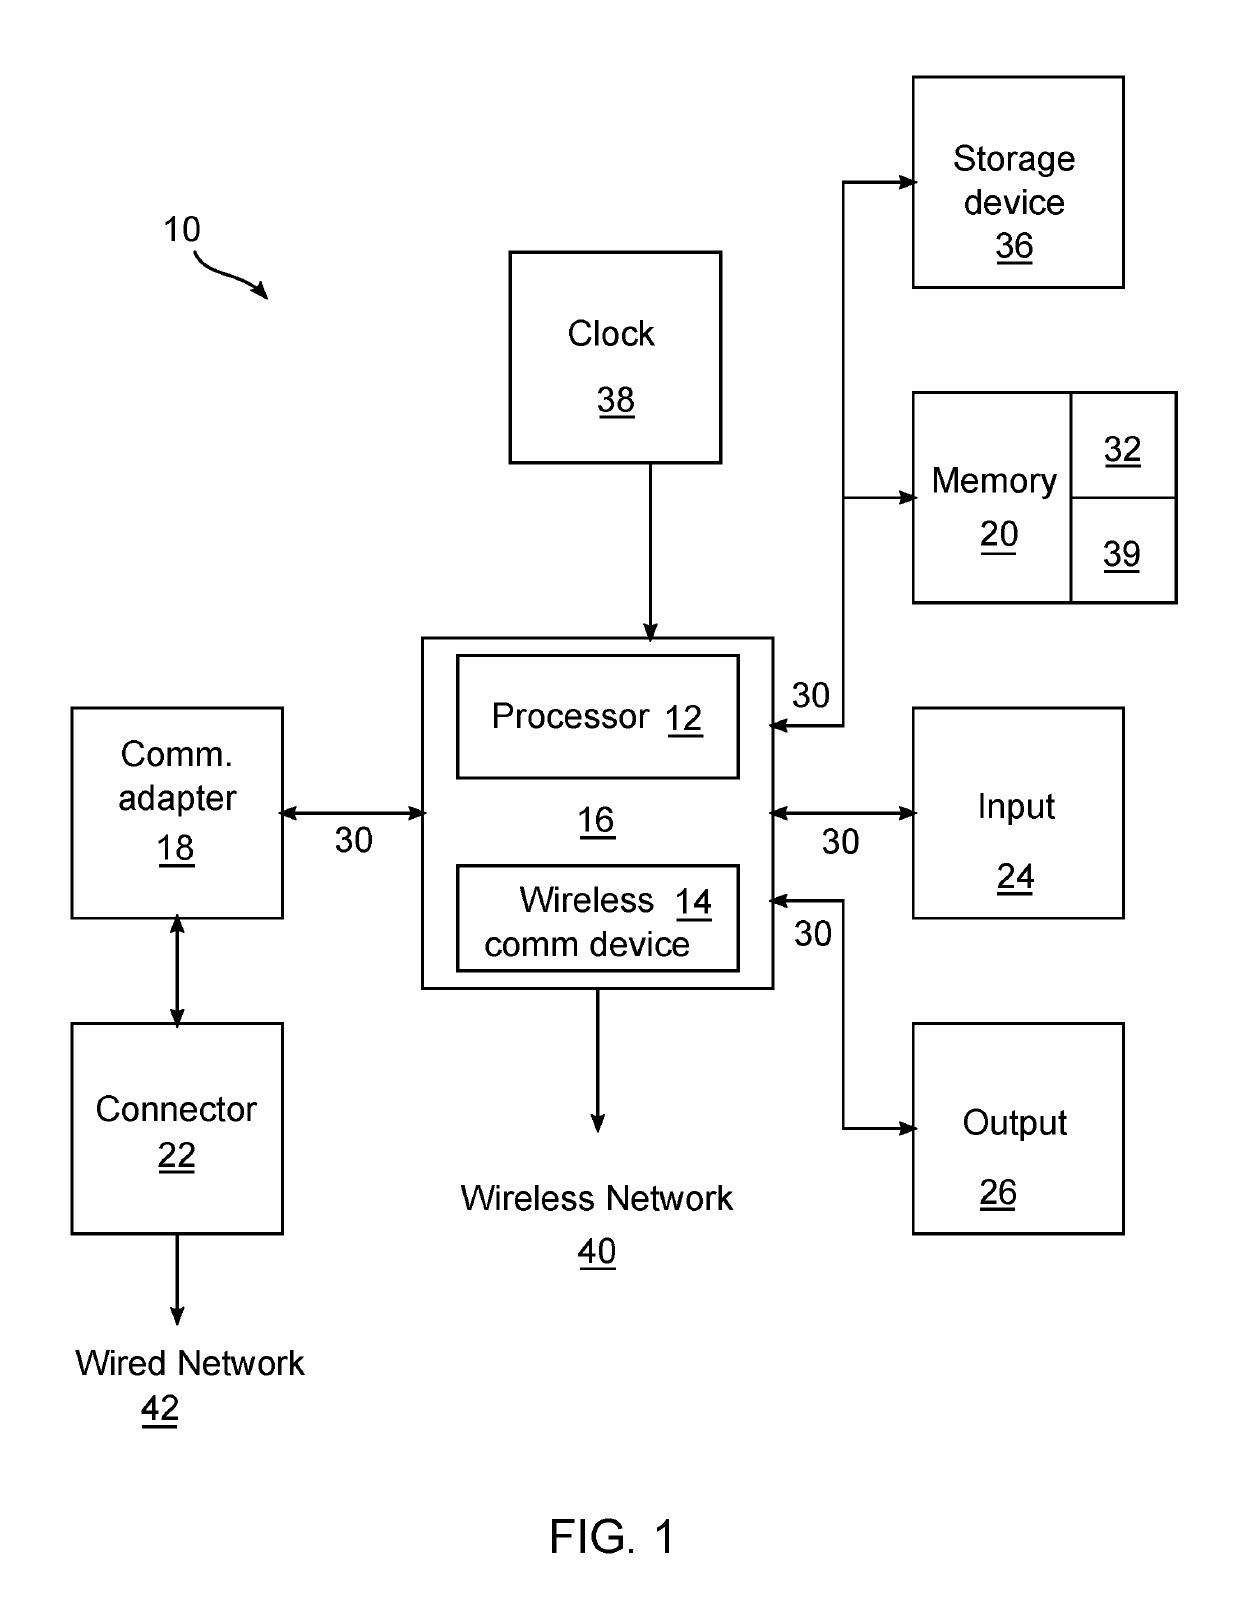 Network traffic and processor activity management apparatuses, systems, and methods